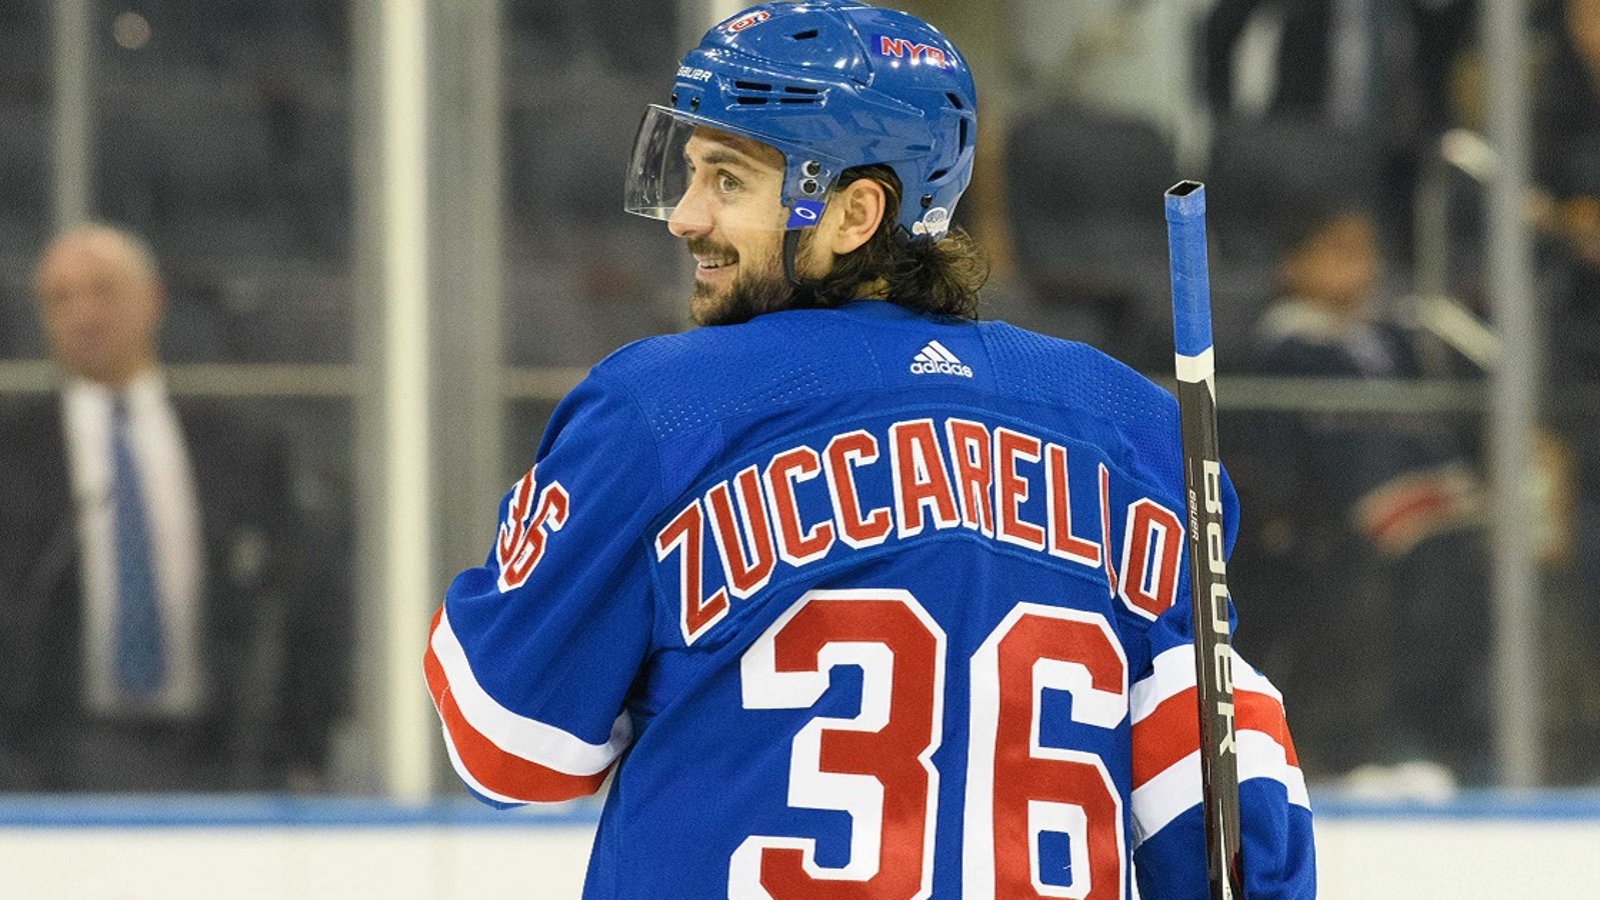 Breaking: Rangers have traded Mats Zuccarello.